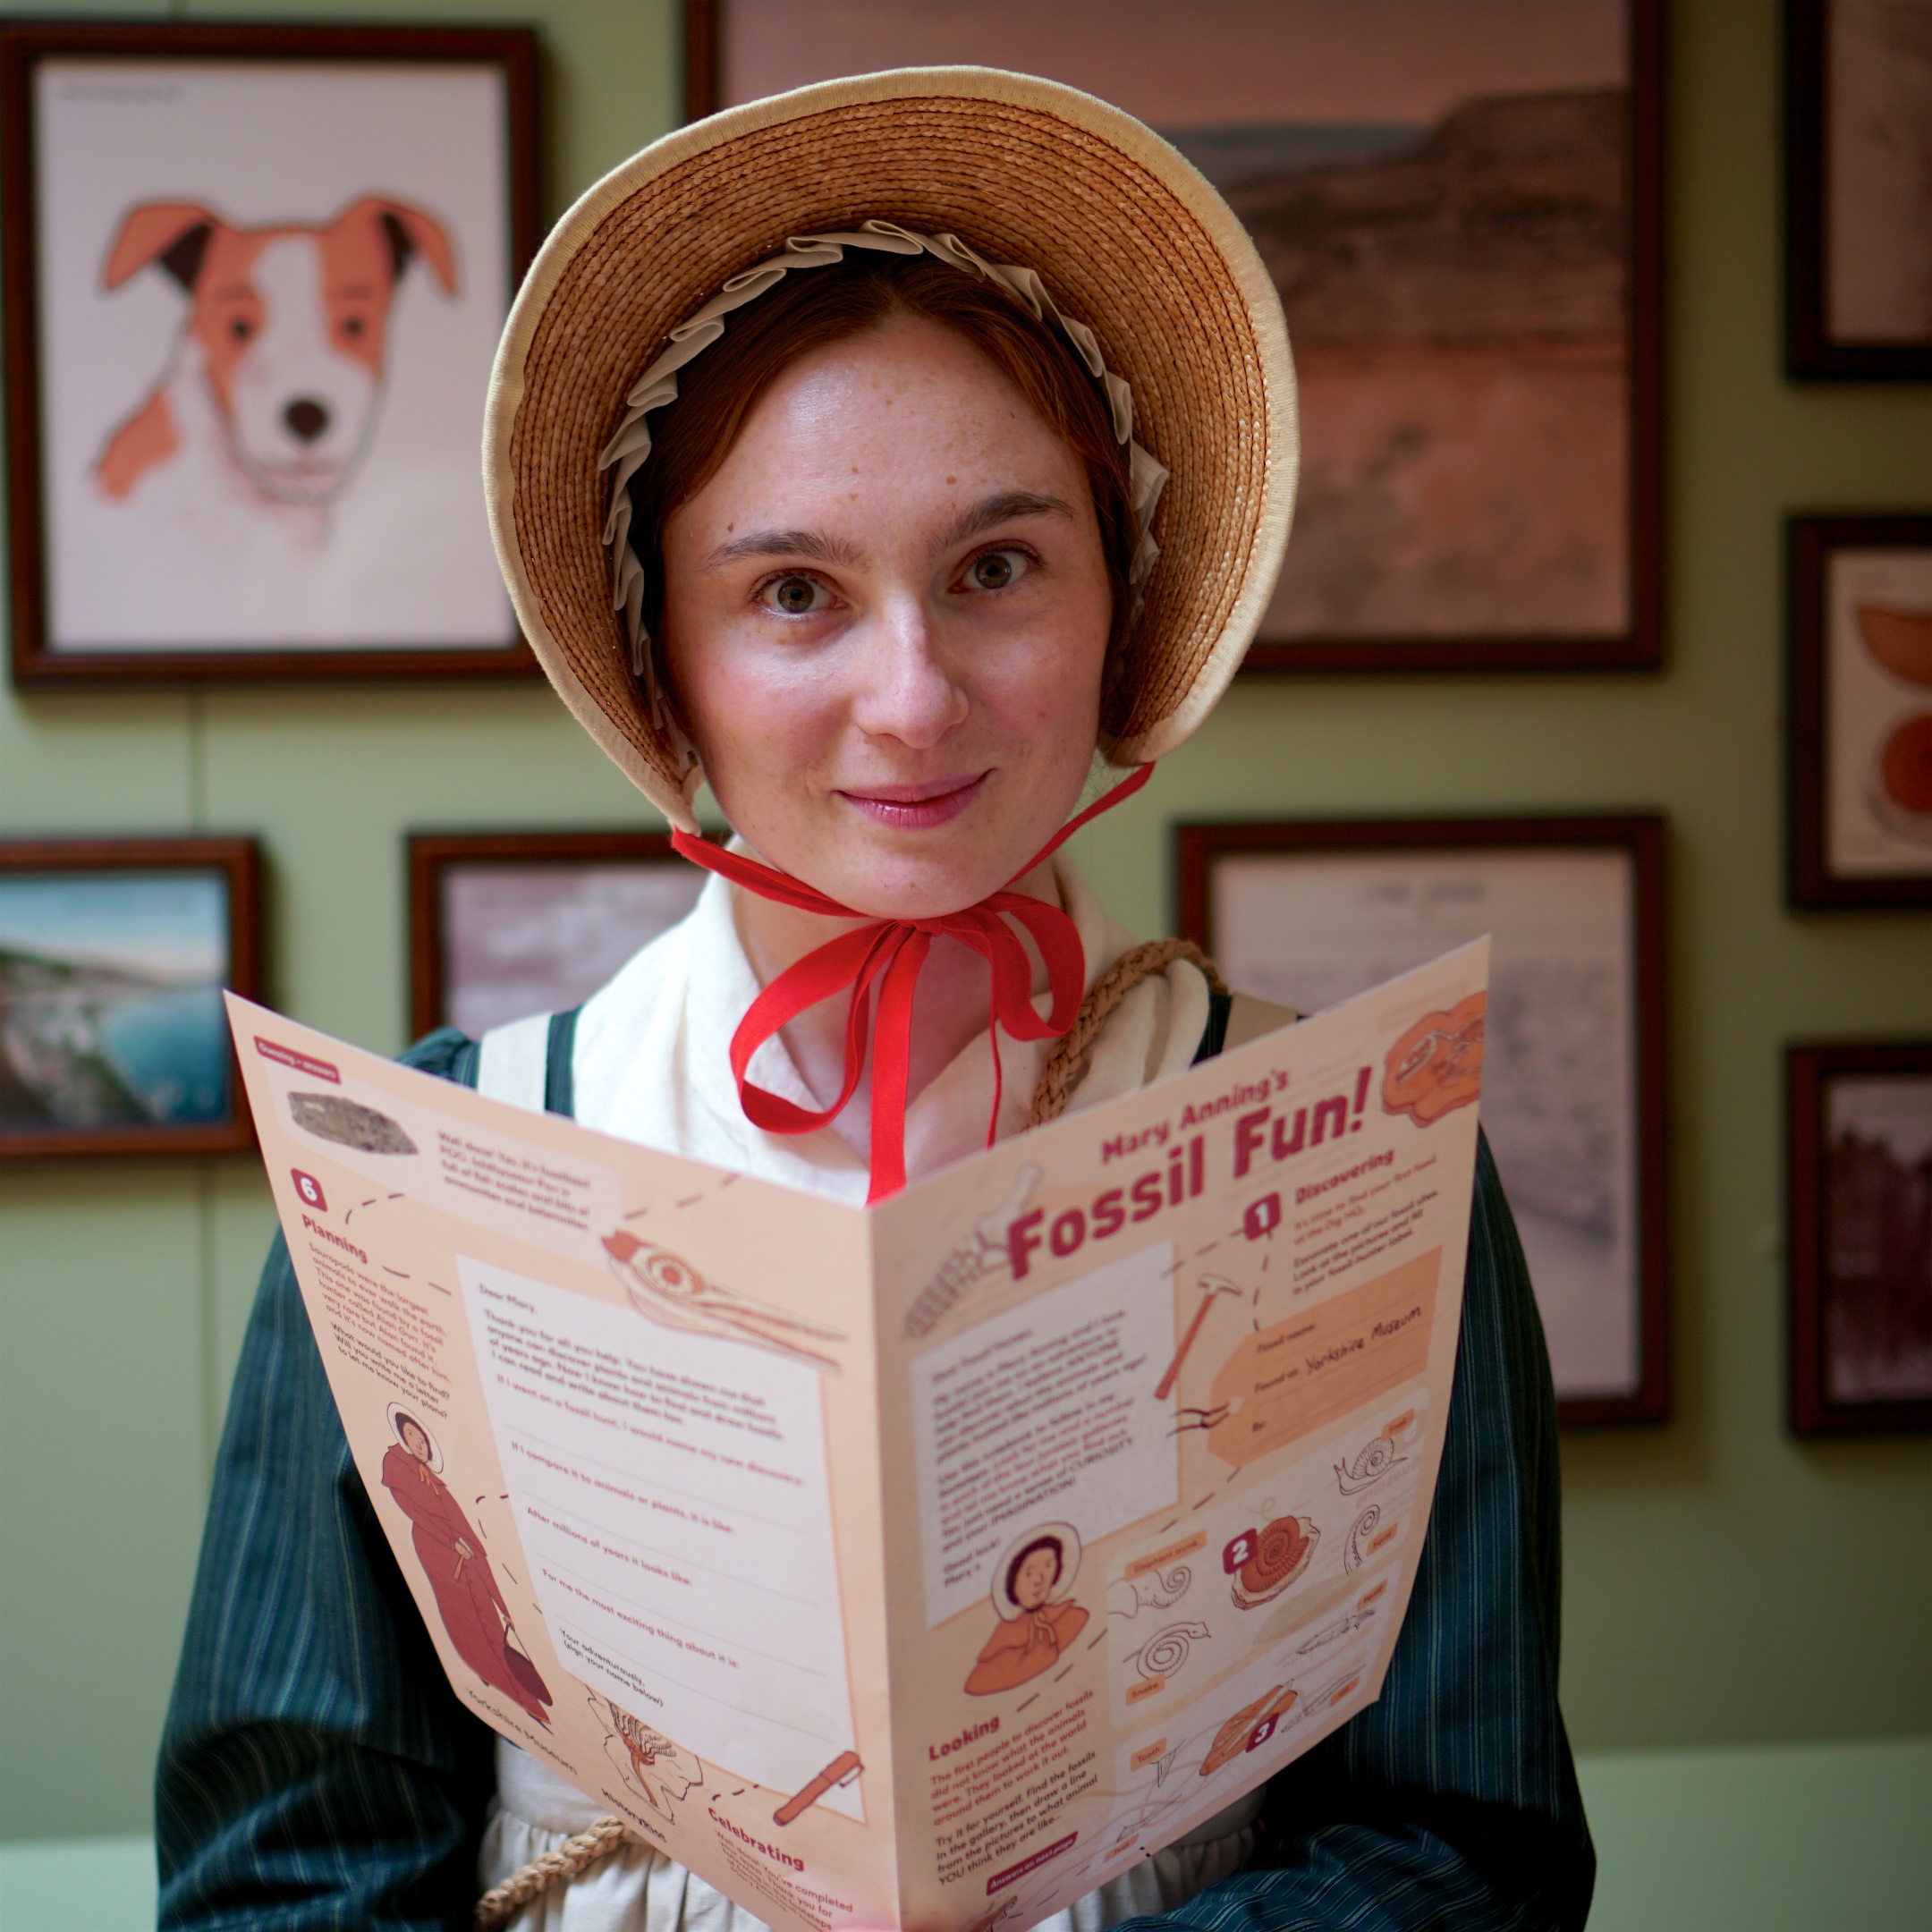 Mary Anning and the Fossil Fun Trail